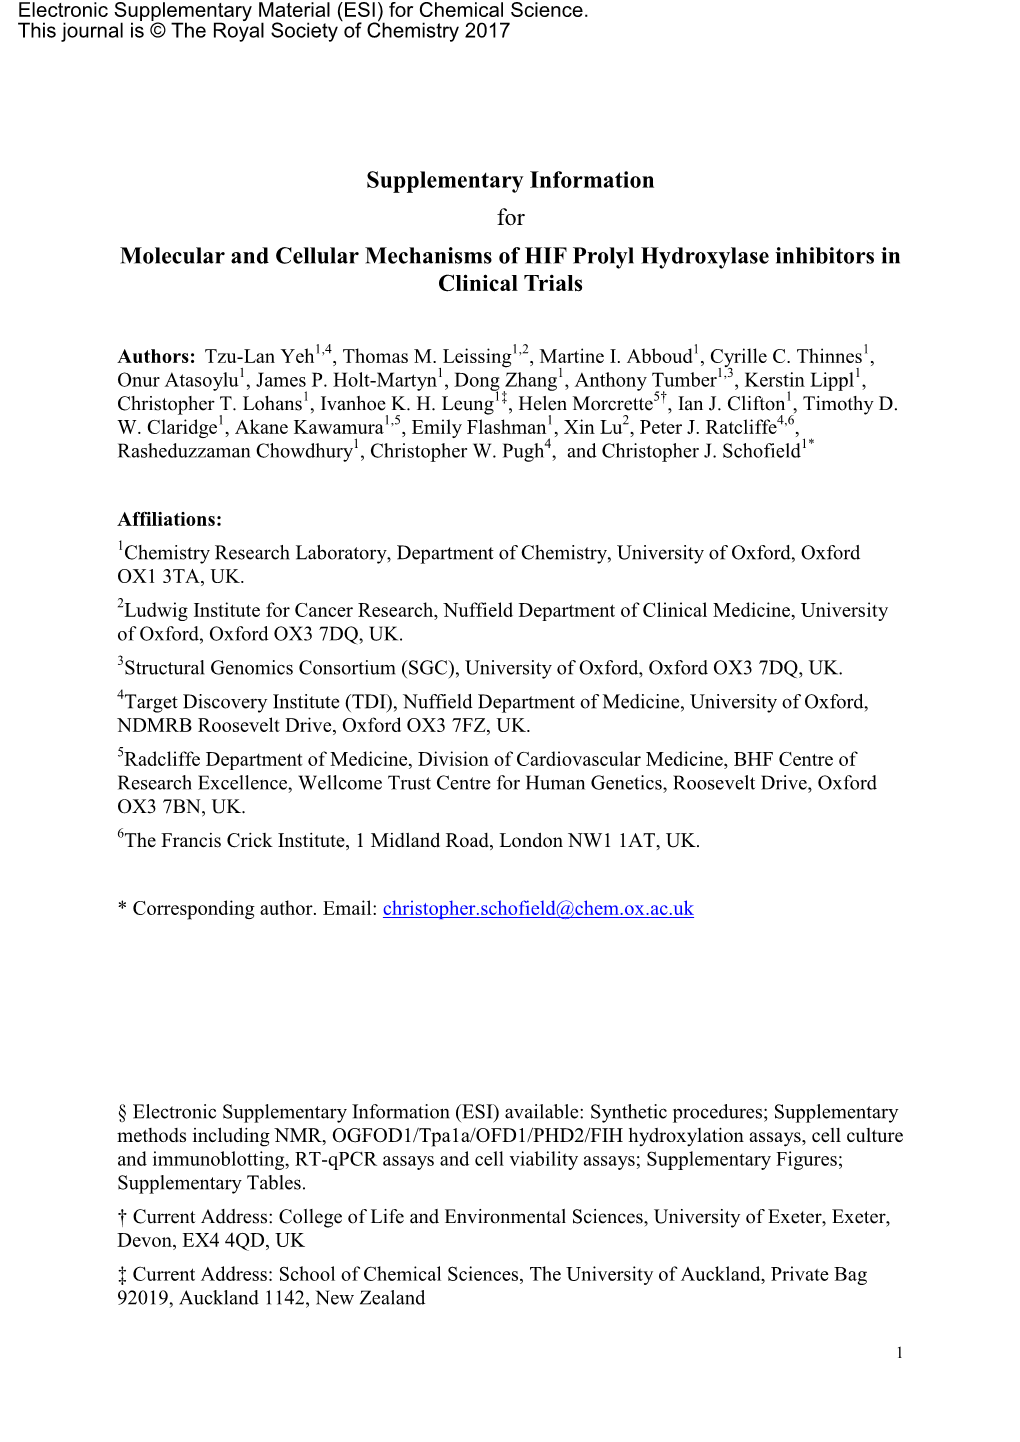 Supplementary Information for Molecular and Cellular Mechanisms of HIF Prolyl Hydroxylase Inhibitors in Clinical Trials